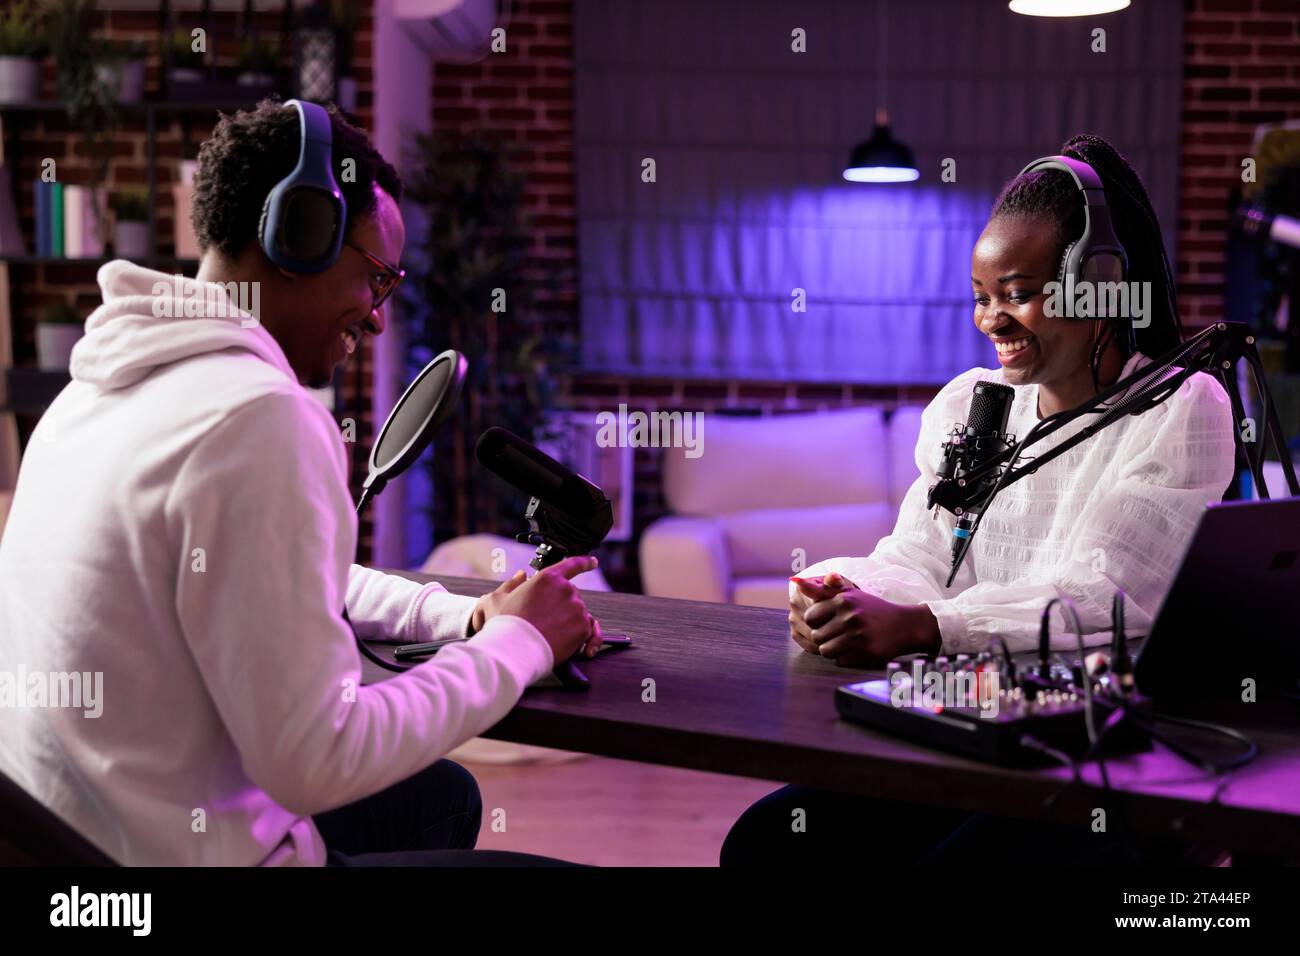 Online show host interviewing guest sharing funny anecdotes and jokes during live broadcast. Talking show interviewer using professional microphone and camera to record podcast Stock Photo